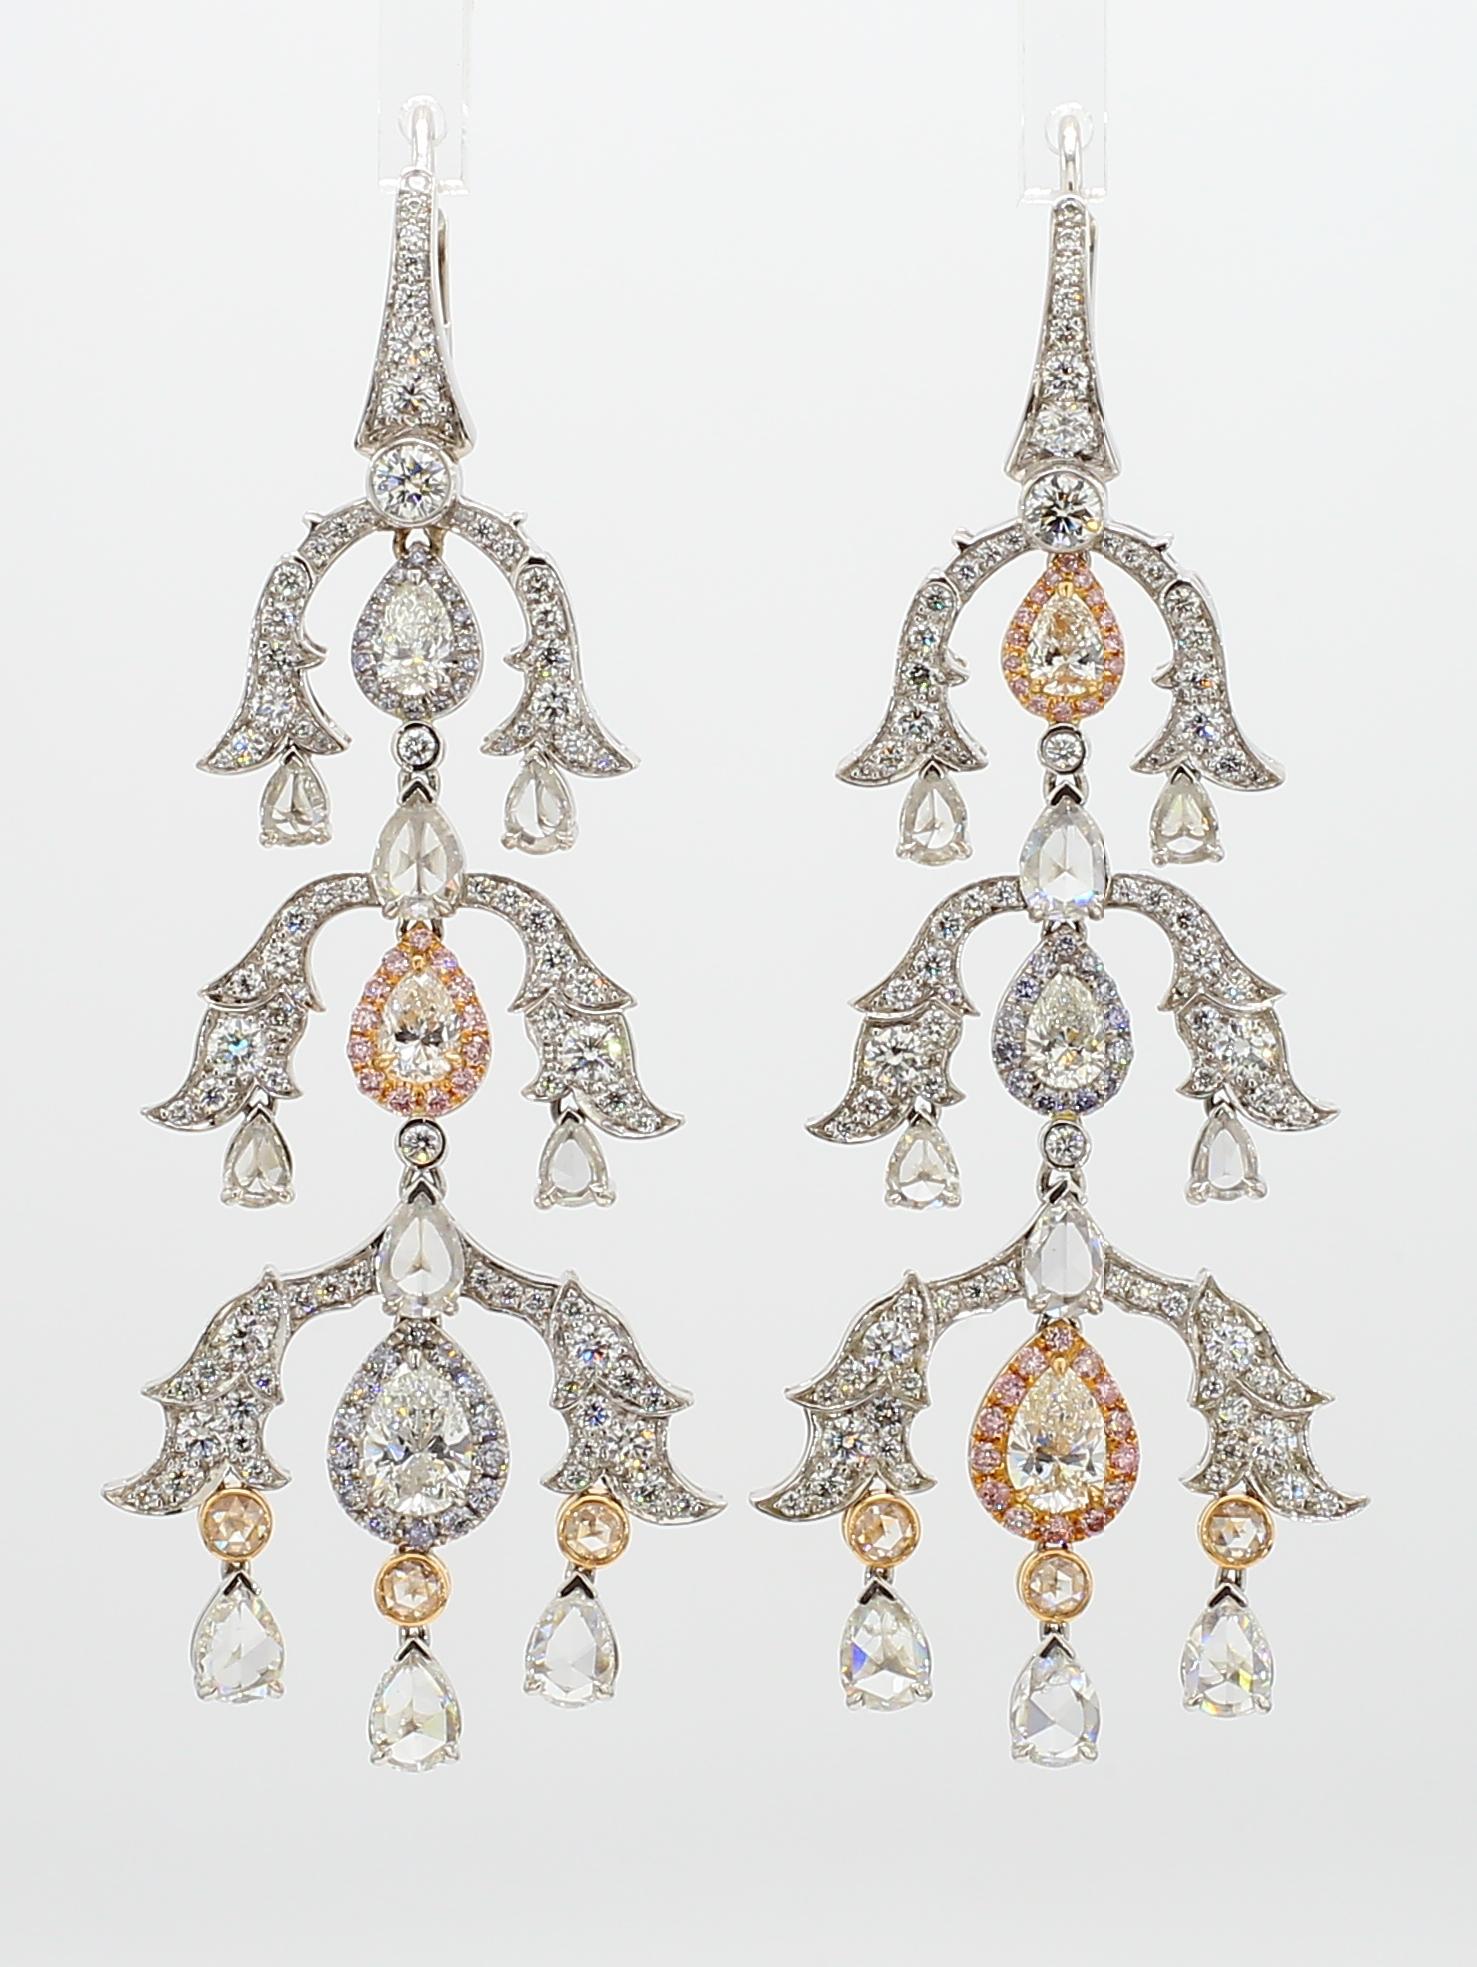 Pear Cut Just Under 7 Ct. White & Pink Diamond 18k Yellow Gold Chandelier Drop Earrings. For Sale